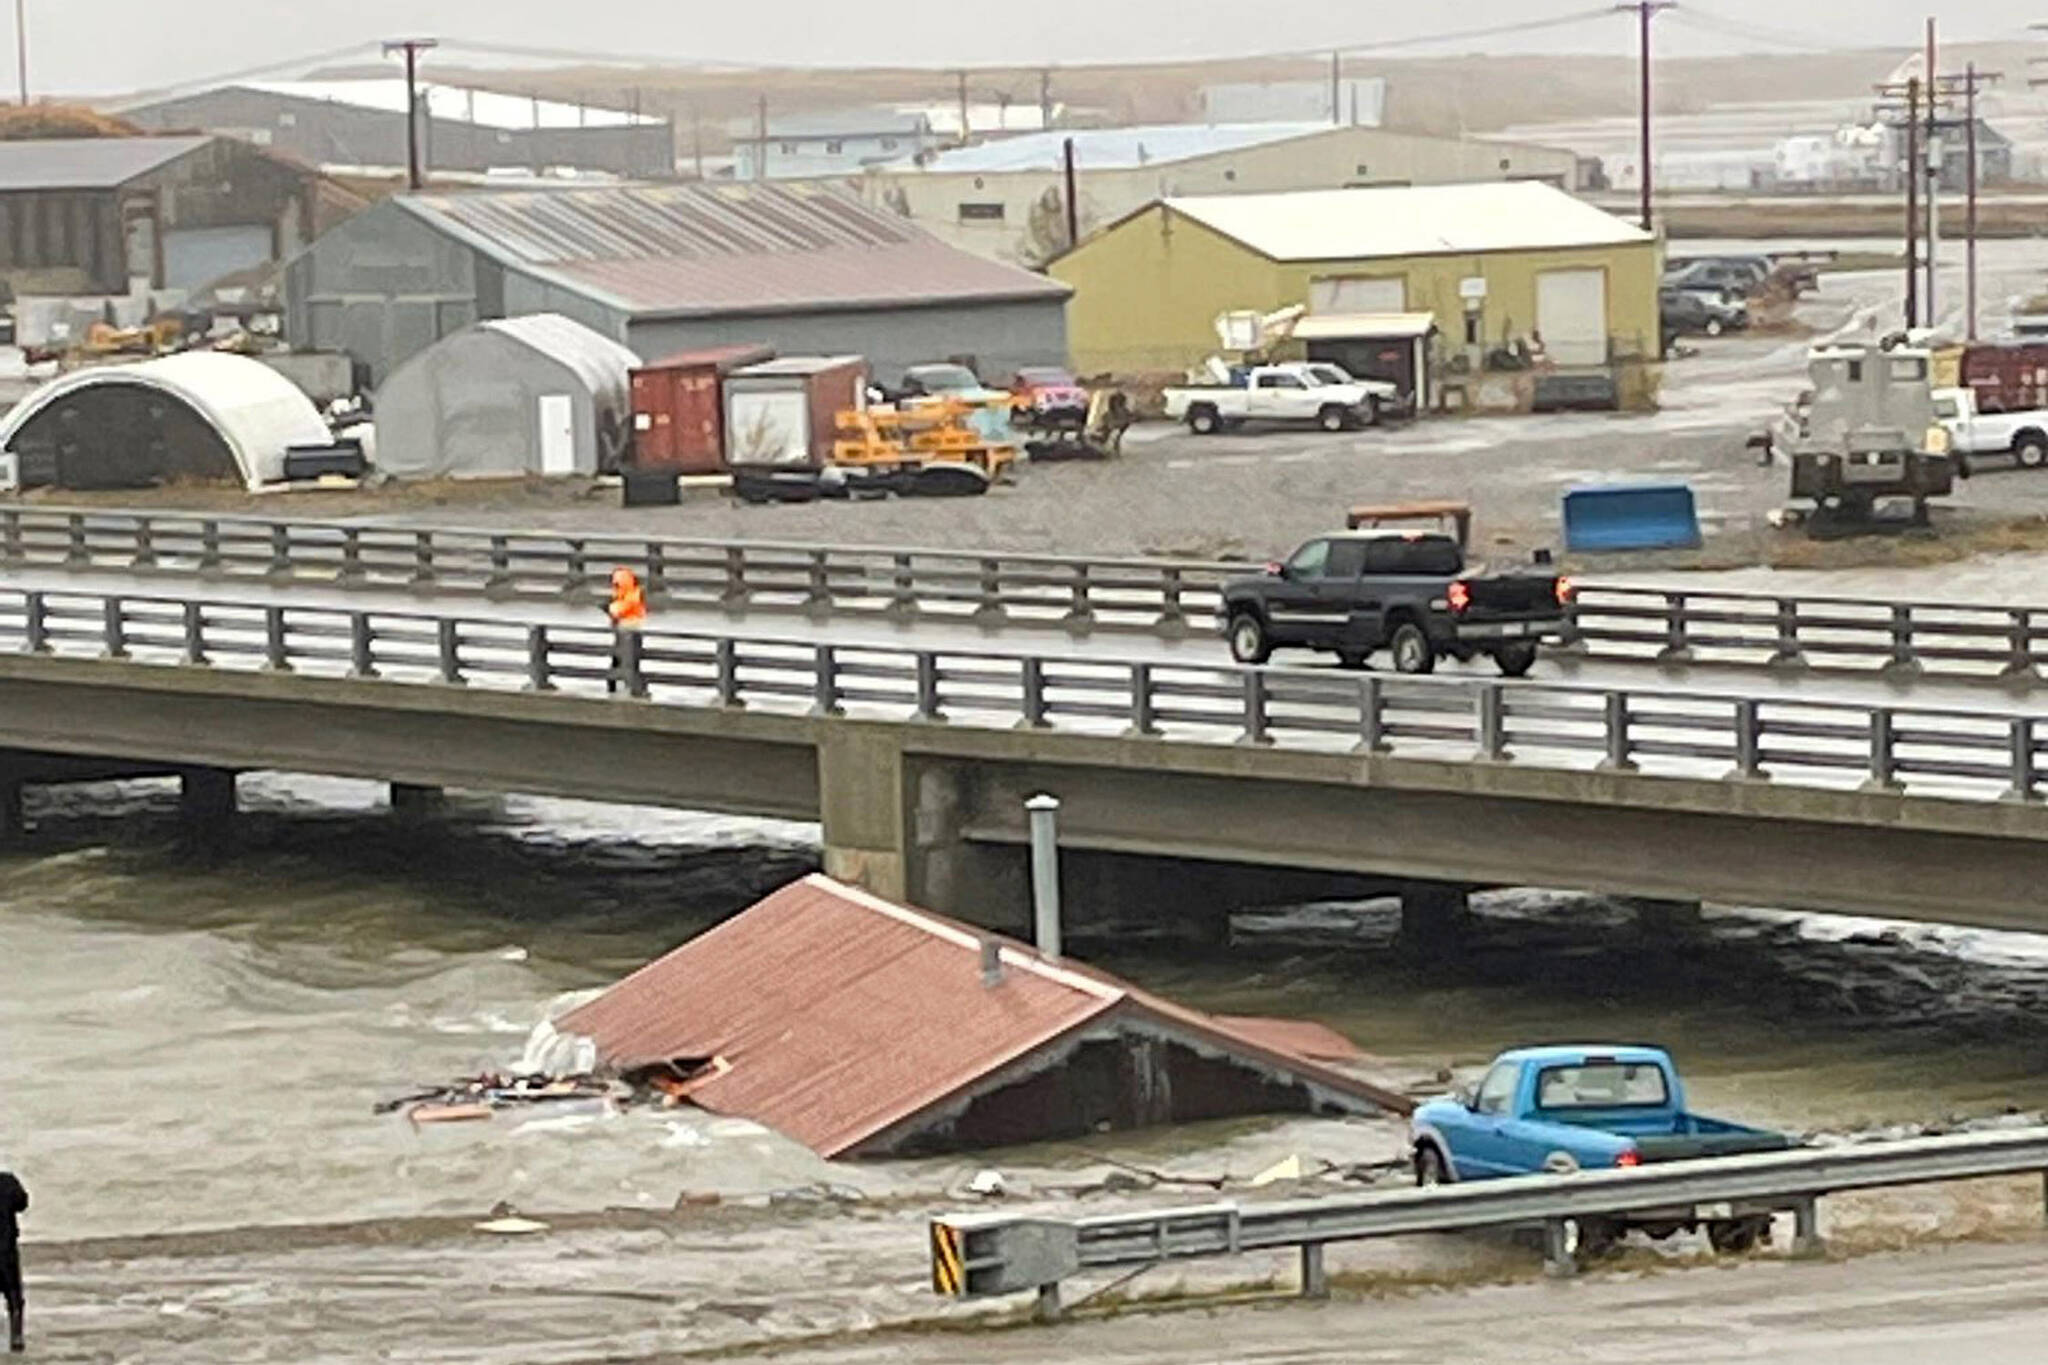 A home that was knocked off its foundation floats down Snake River during a severe storm in Nome, Alaska, is caught under a bridge on, Sept. 17, 2022. After the remnants of a rare typhoon caused extensive damage along Alaska’s western coast last fall, the U.S. government stepped in to help residents, largely Alaska Natives, recovery financially. (AP Photo/Peggy Fagerstrom, File)